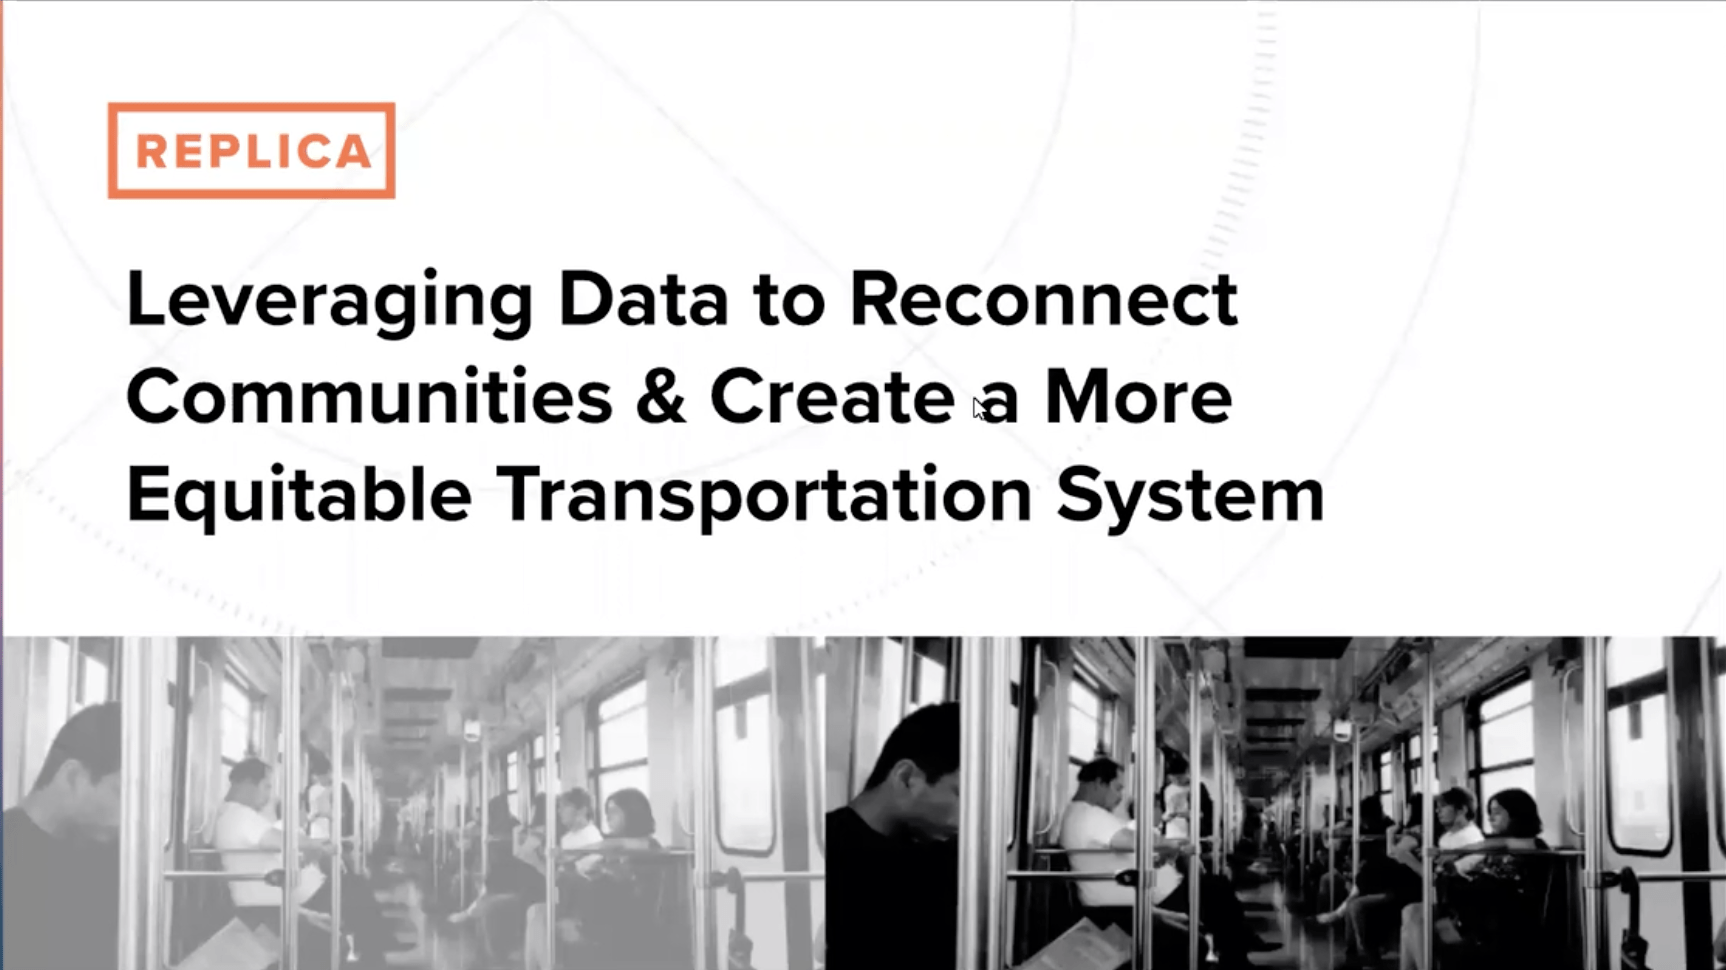 Leveraging Data to Reconnect Communities and Create a More Equitable Transportation System